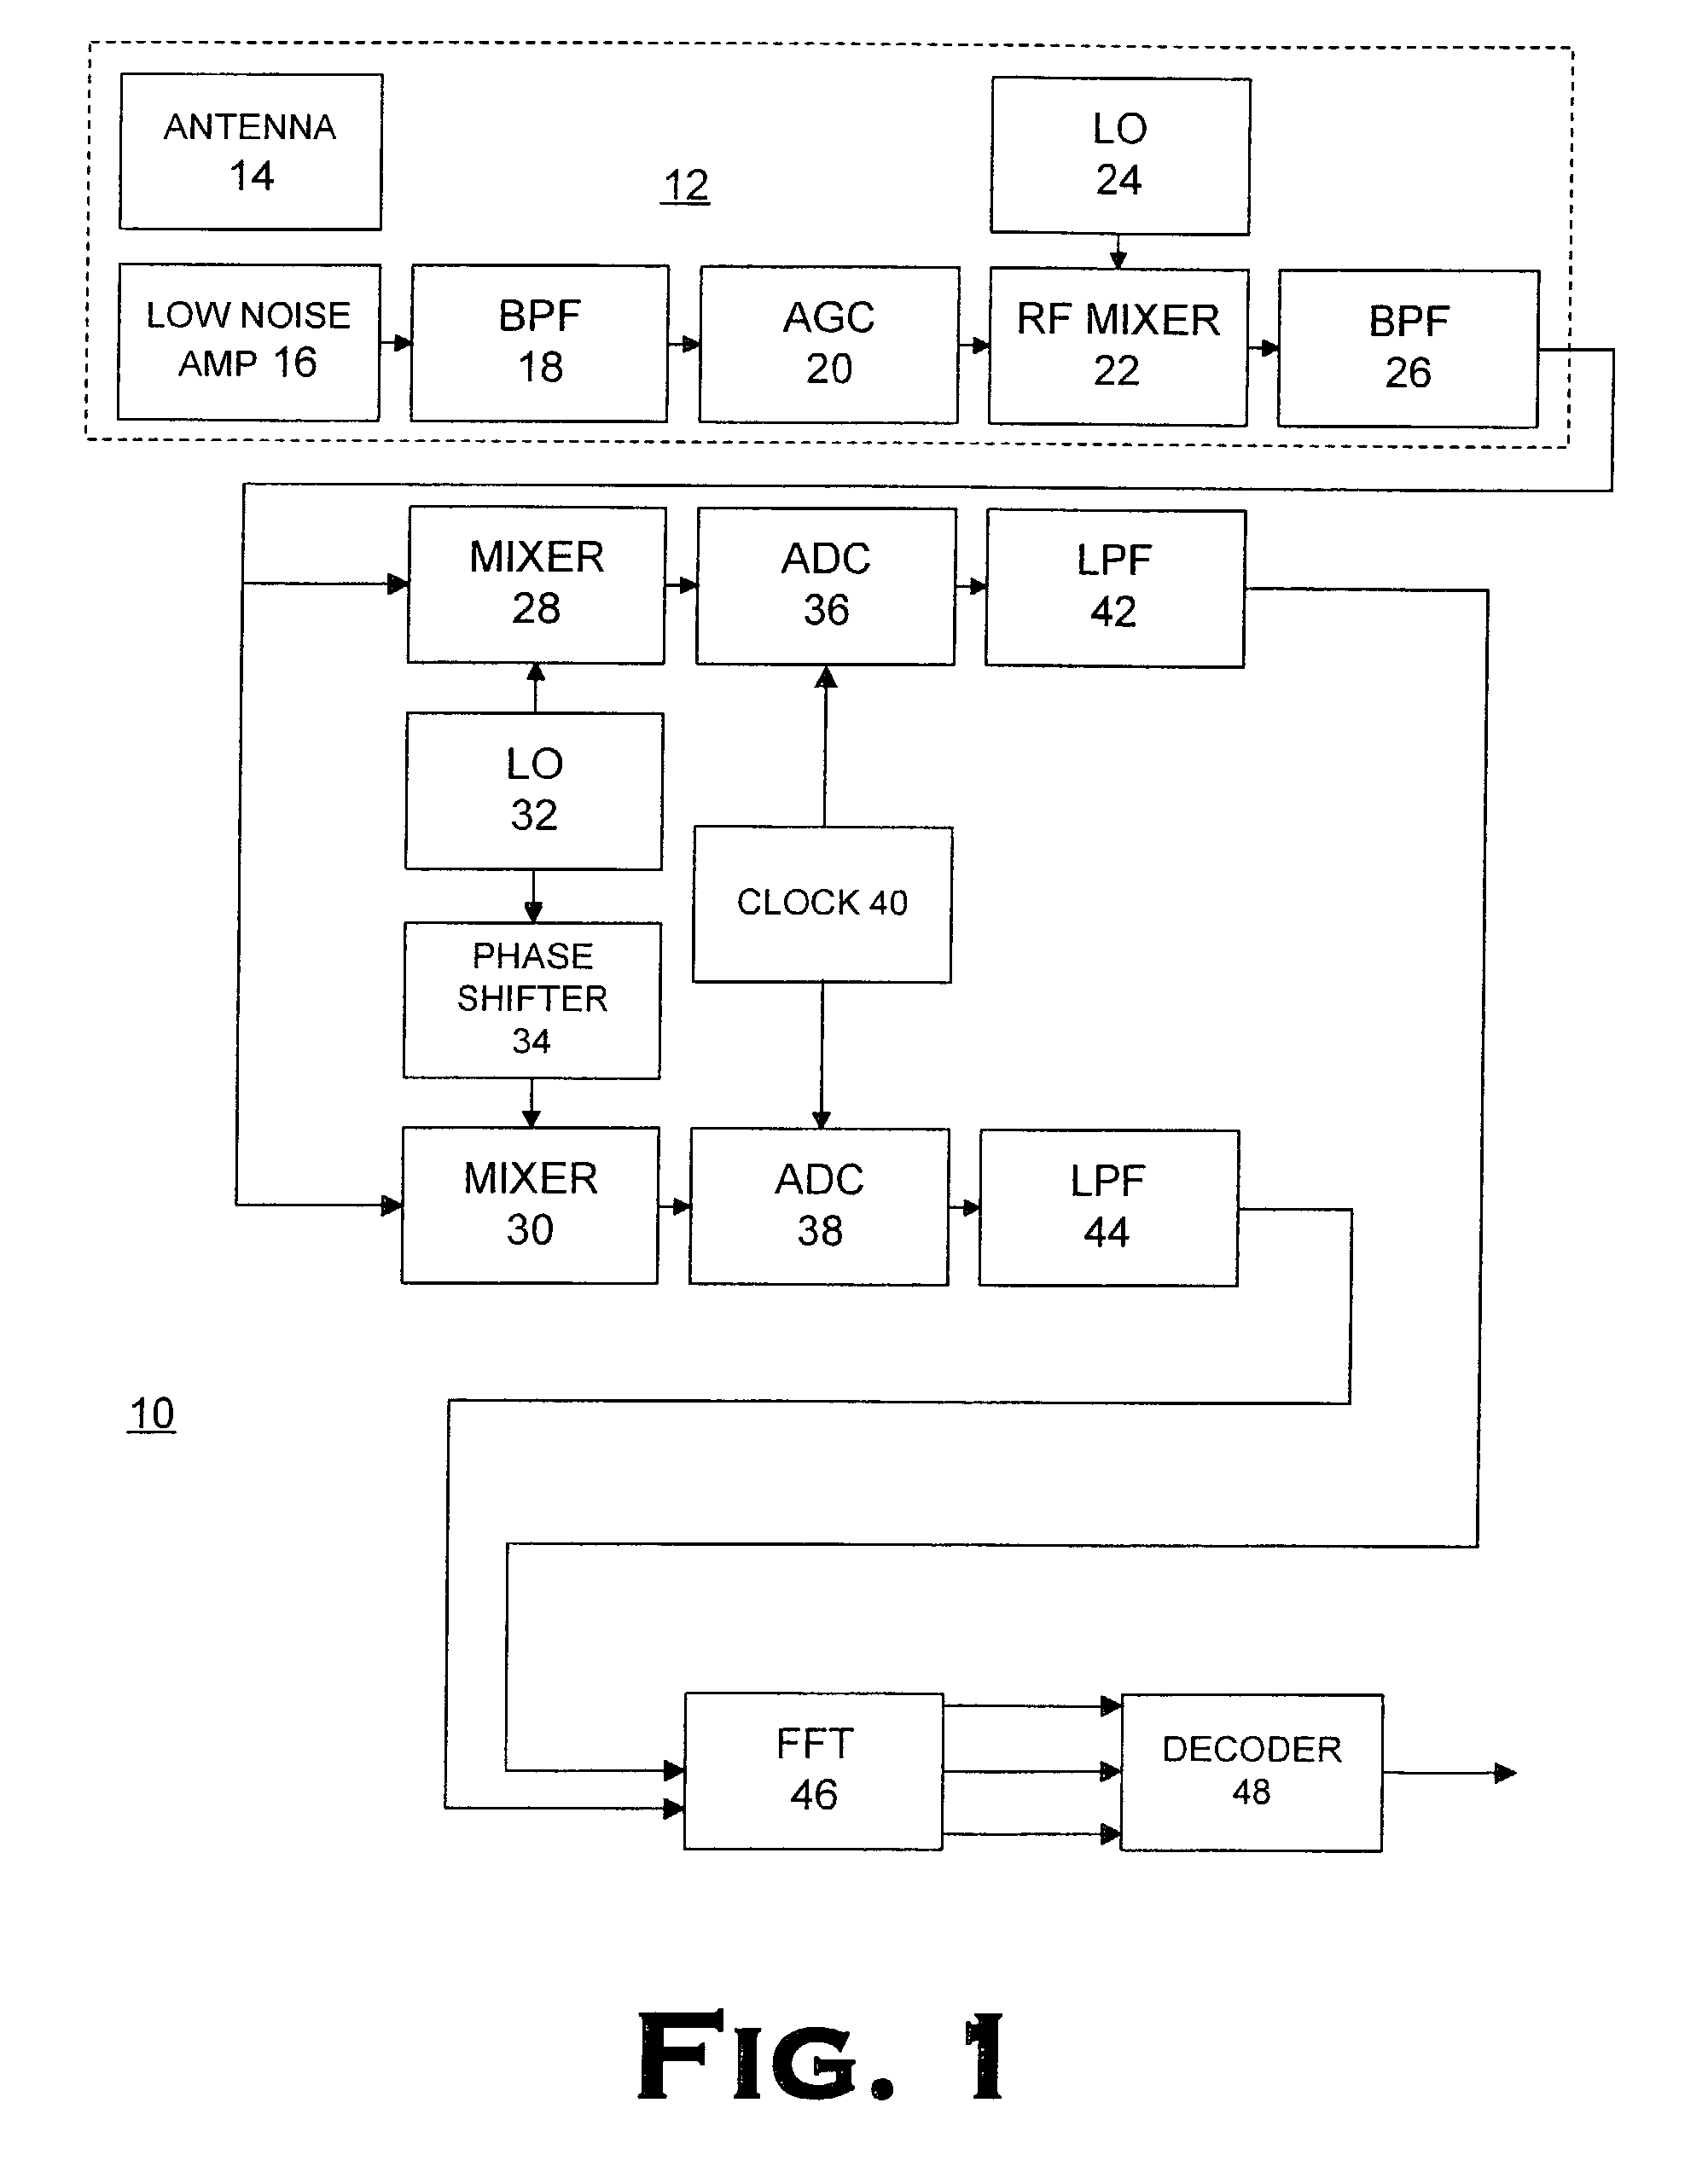 Method and apparatus for adjacent channel interference reduction in an orthogonal frequency division multiplexing (OFDM) receiver